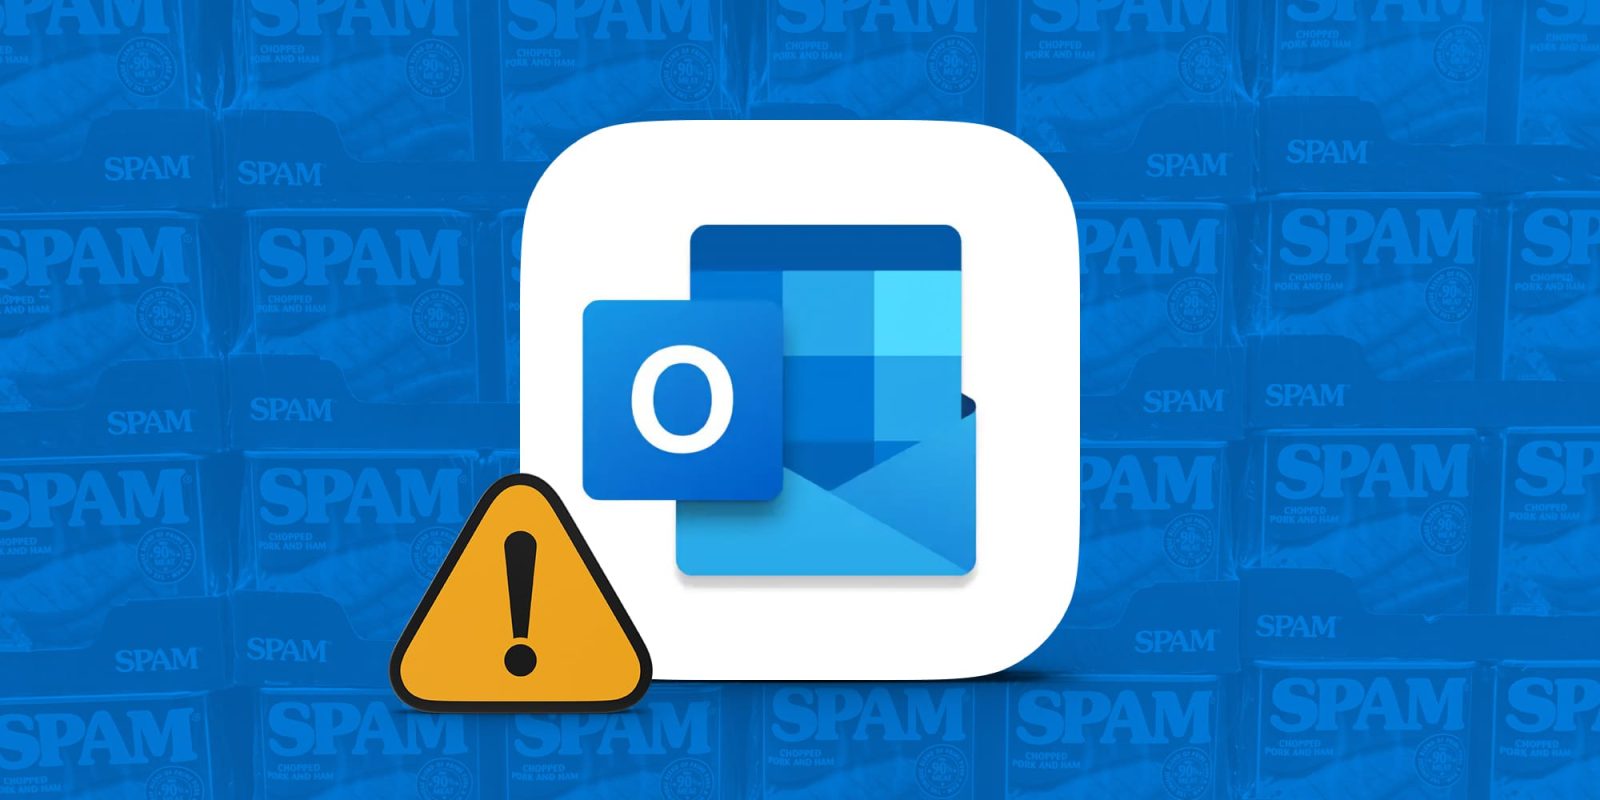 Microsoft Outlook spam filters